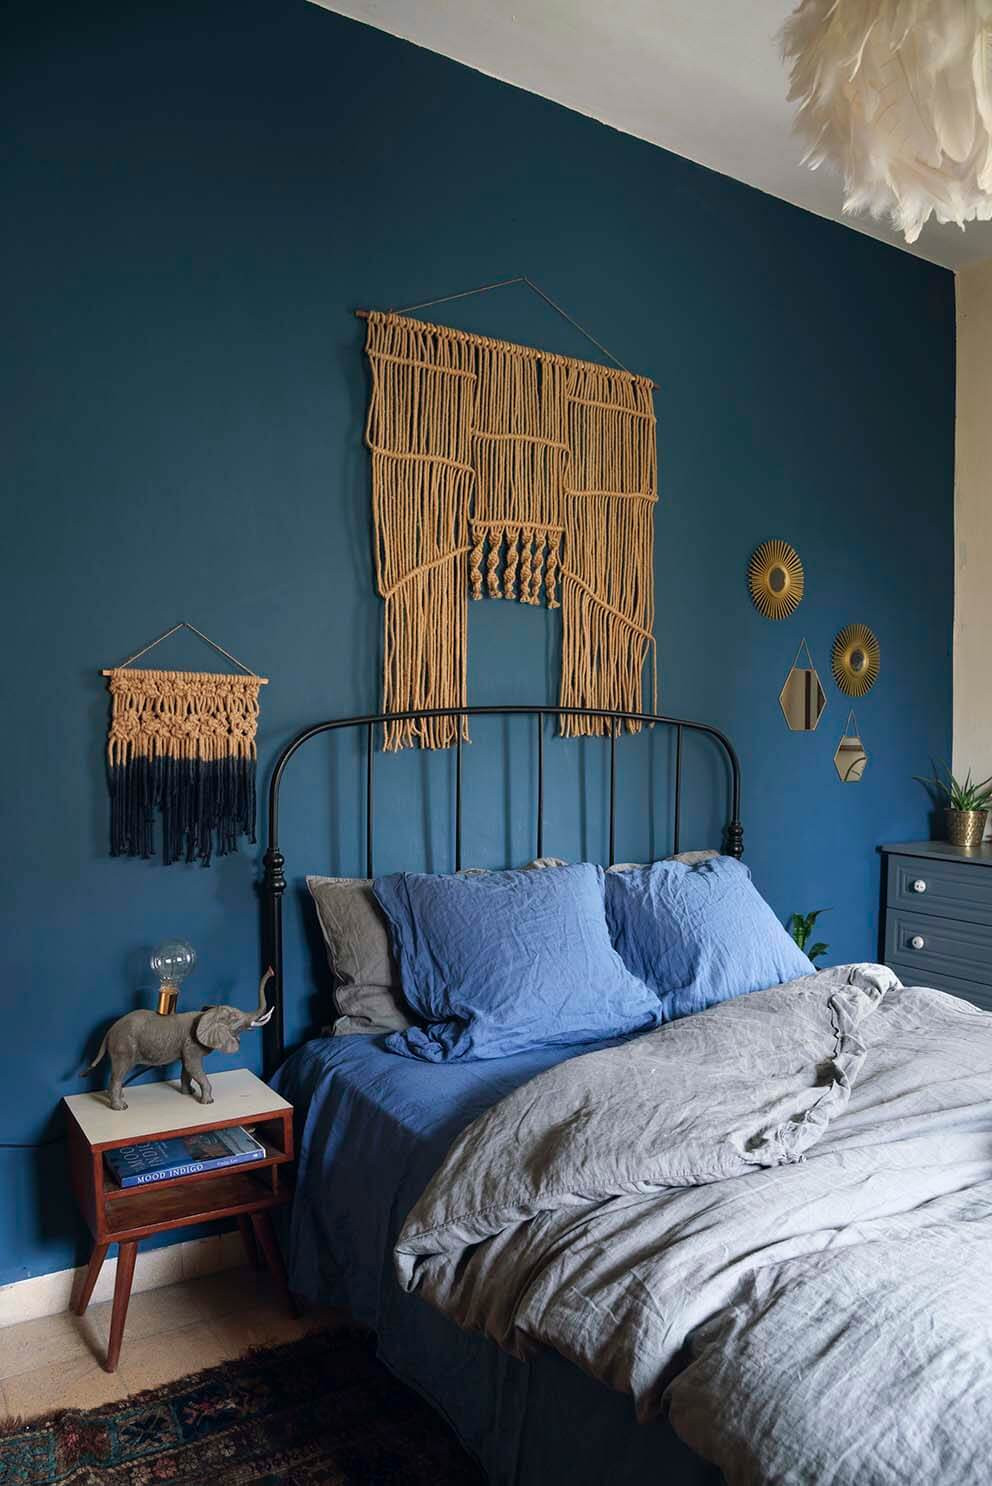 Arts For Bedroom Walls
 This Is How To Decorate With Blue Walls